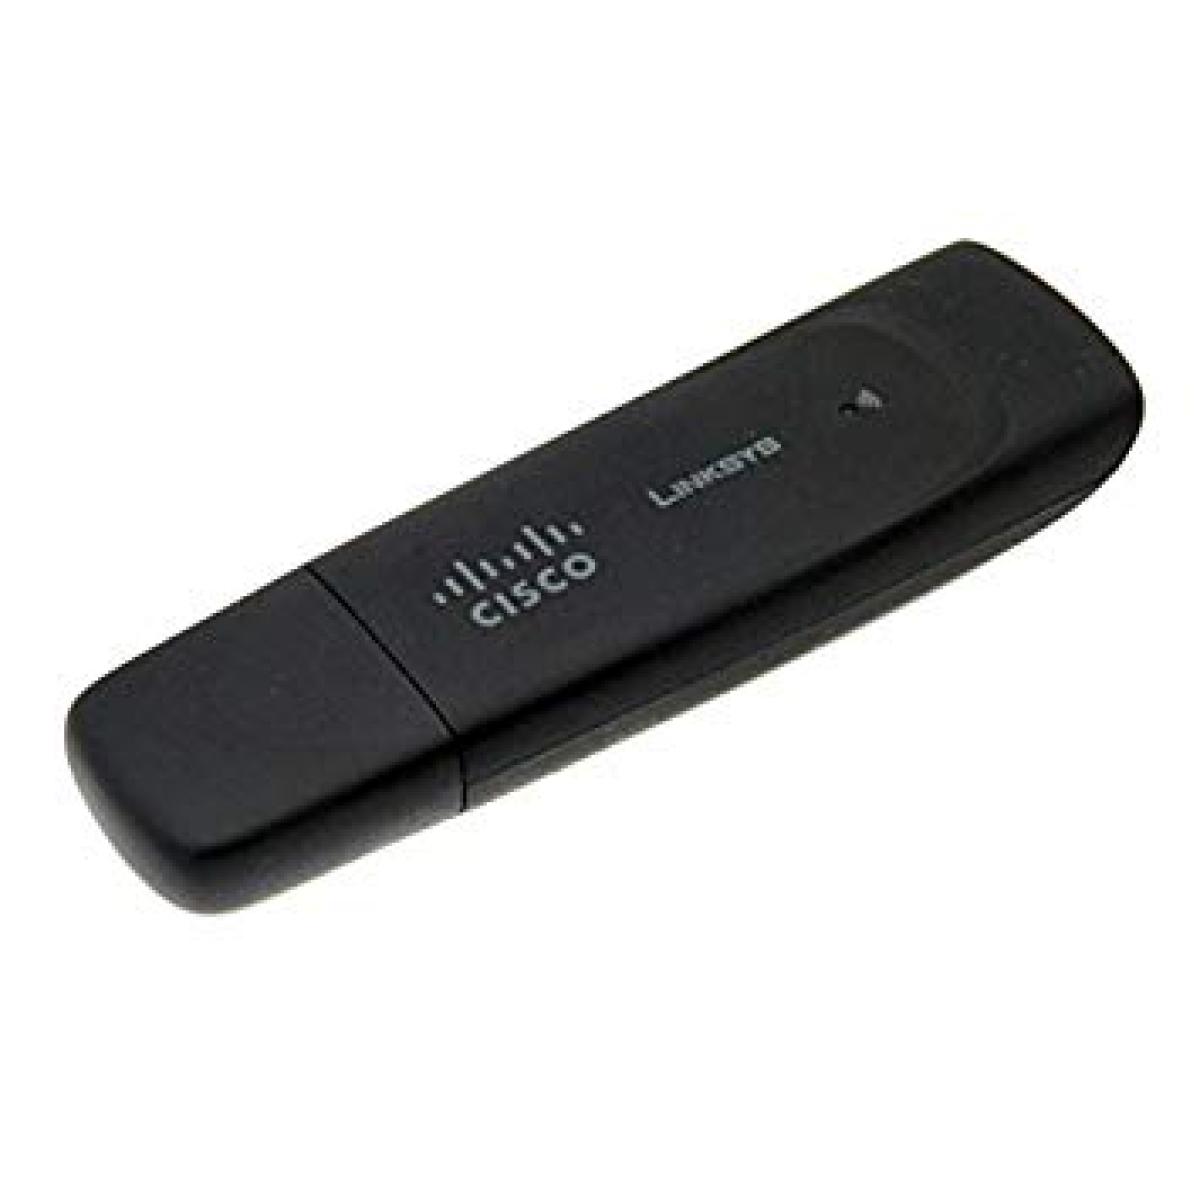 Linksys WUSB54GC Wireless-G USB Compact Network Adapter